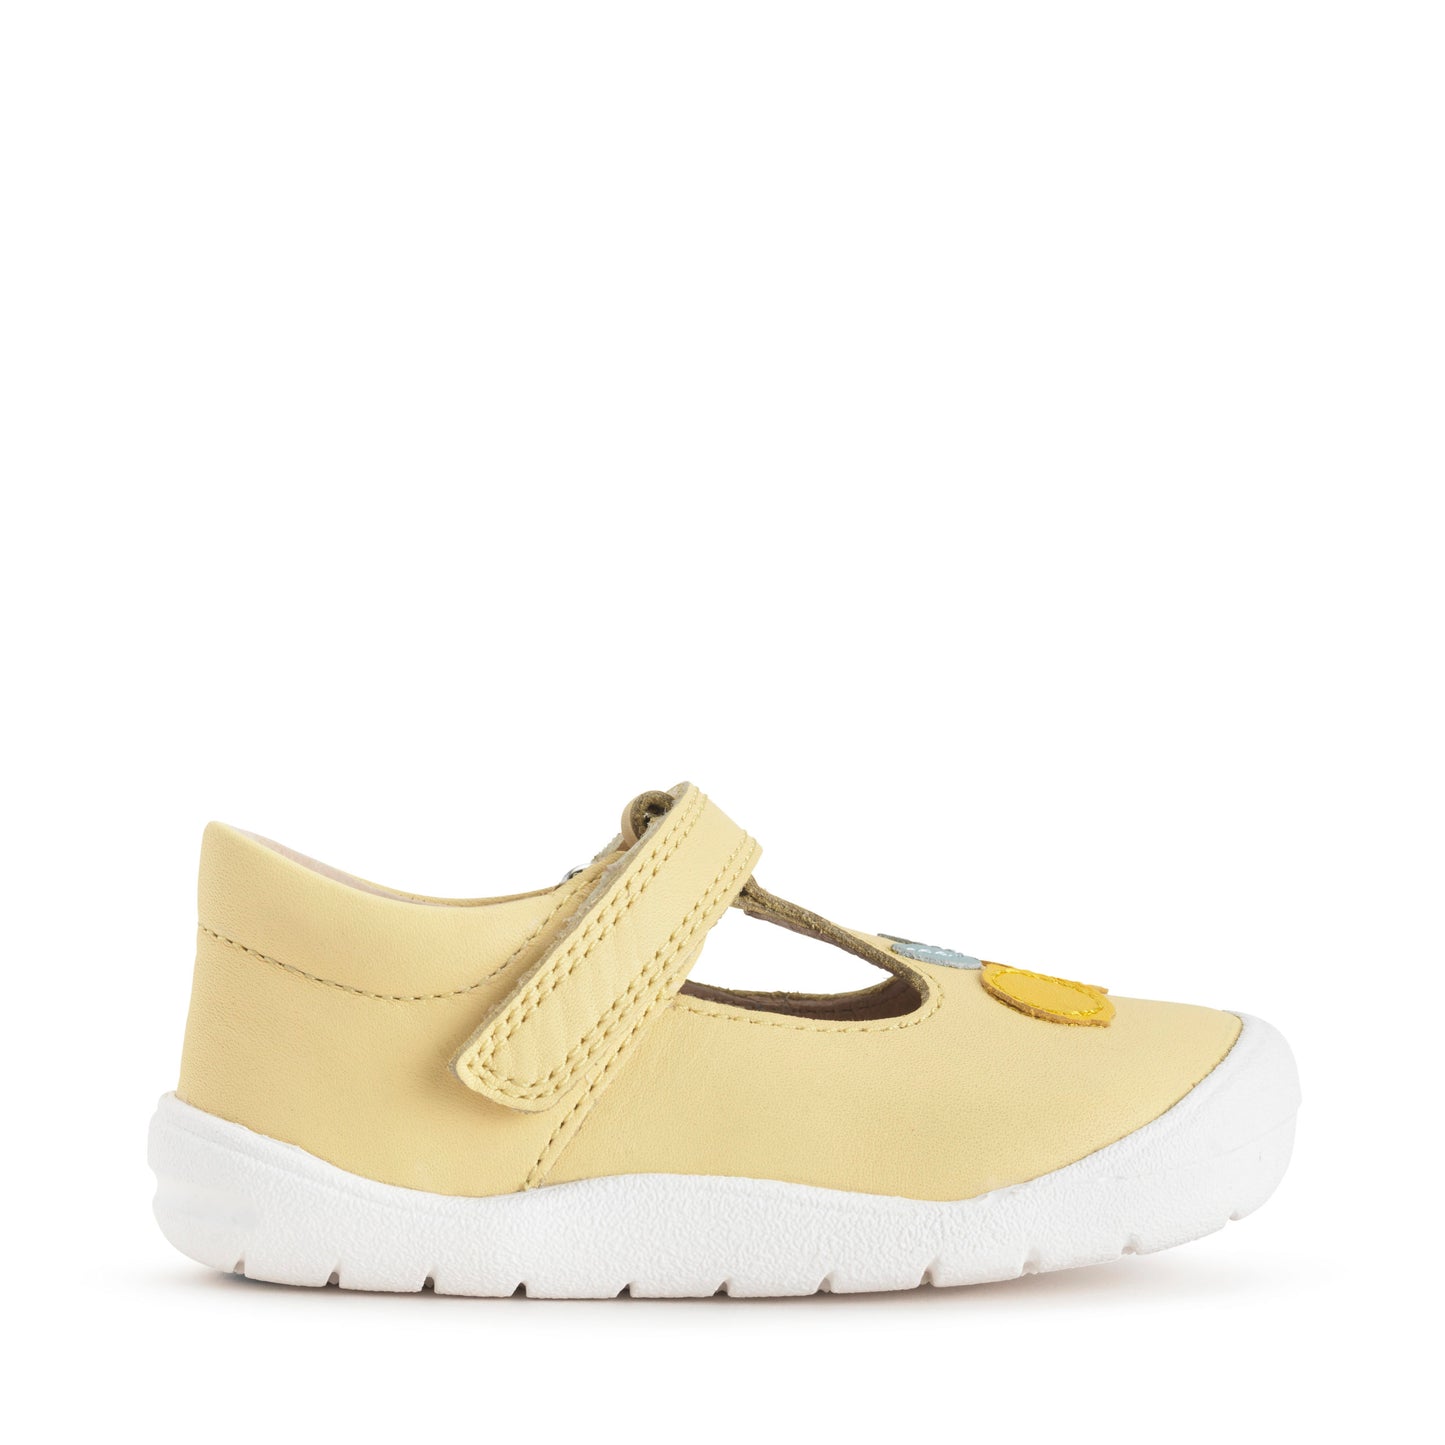 A girls T-Bar shoe by Start Rite + JoJo Maman Bebe ,style Squeeze, in lemon yellow leather with velcro fastening. Right side view.